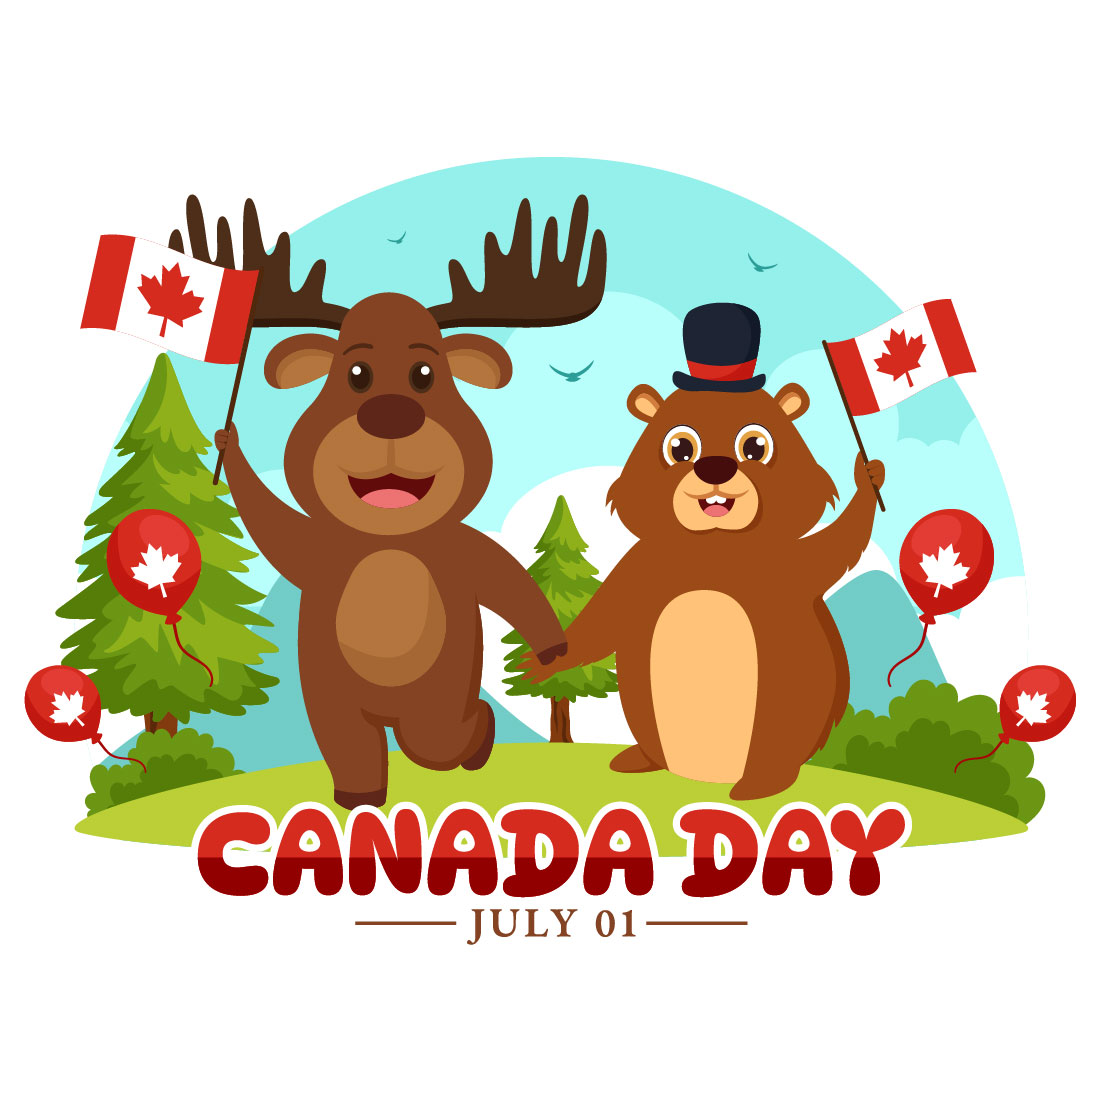 12 Happy Canada Day Illustration cover image.